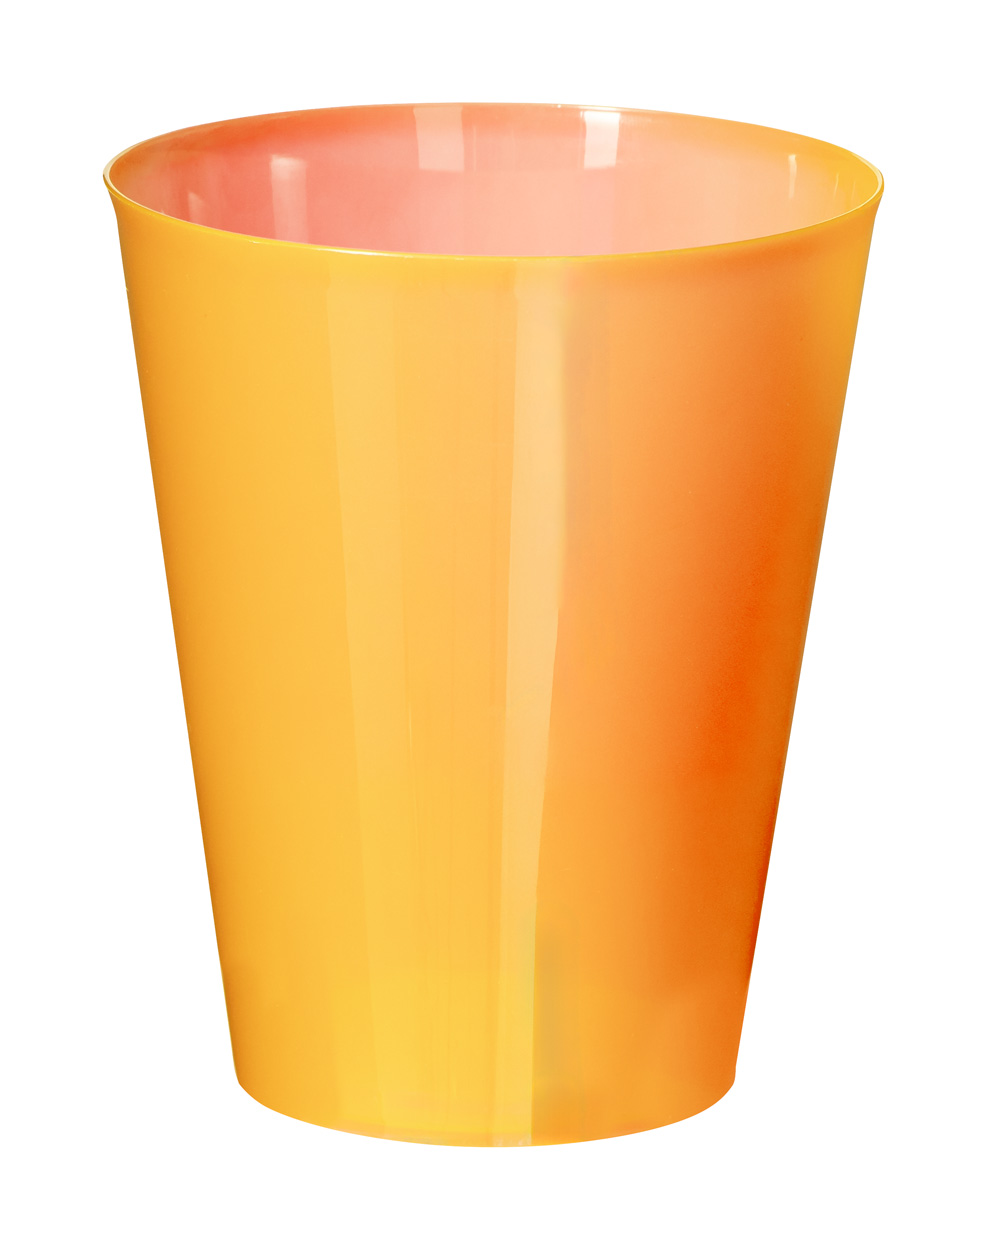 Colorbert reusable cup for events - orange